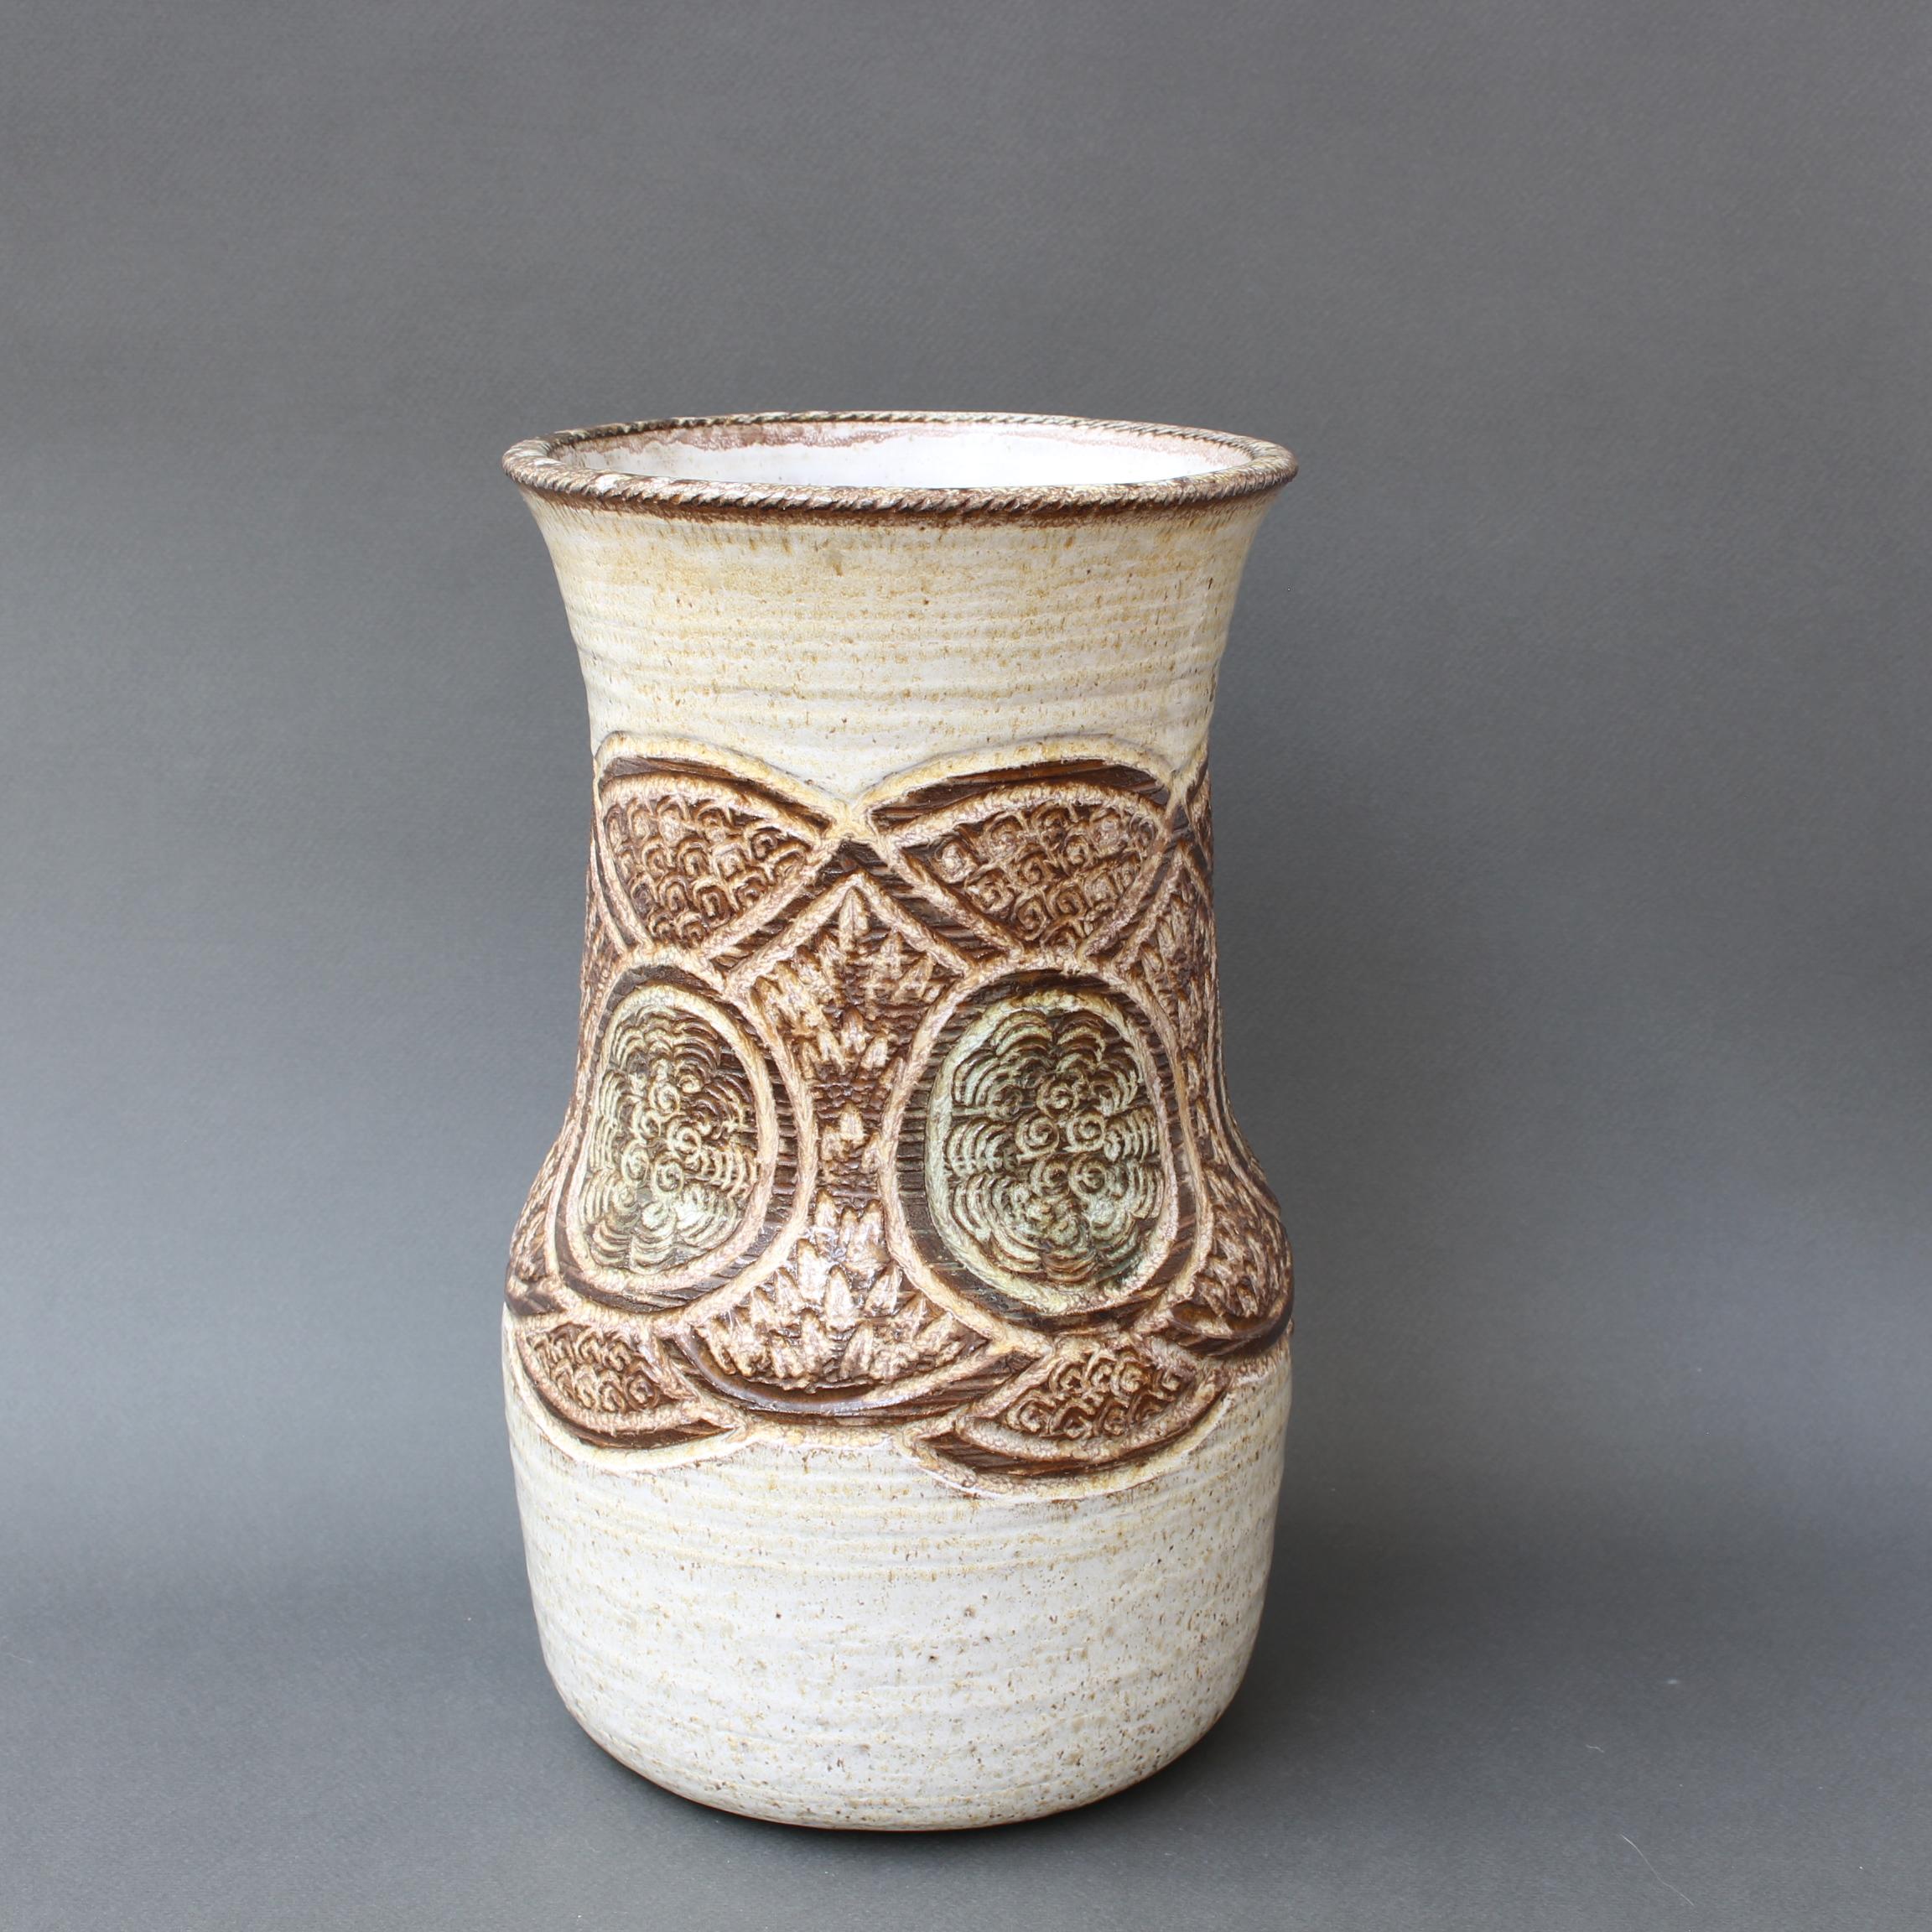 Mid-century ceramic vase (circa 1960s) by Marcel Giraud, Vallauris, France. A large piece with a graceful, curvy shape, wide mouth and muted sandy-white coloured base, it is the epitome of vintage 20th century style. This stunning vase has a